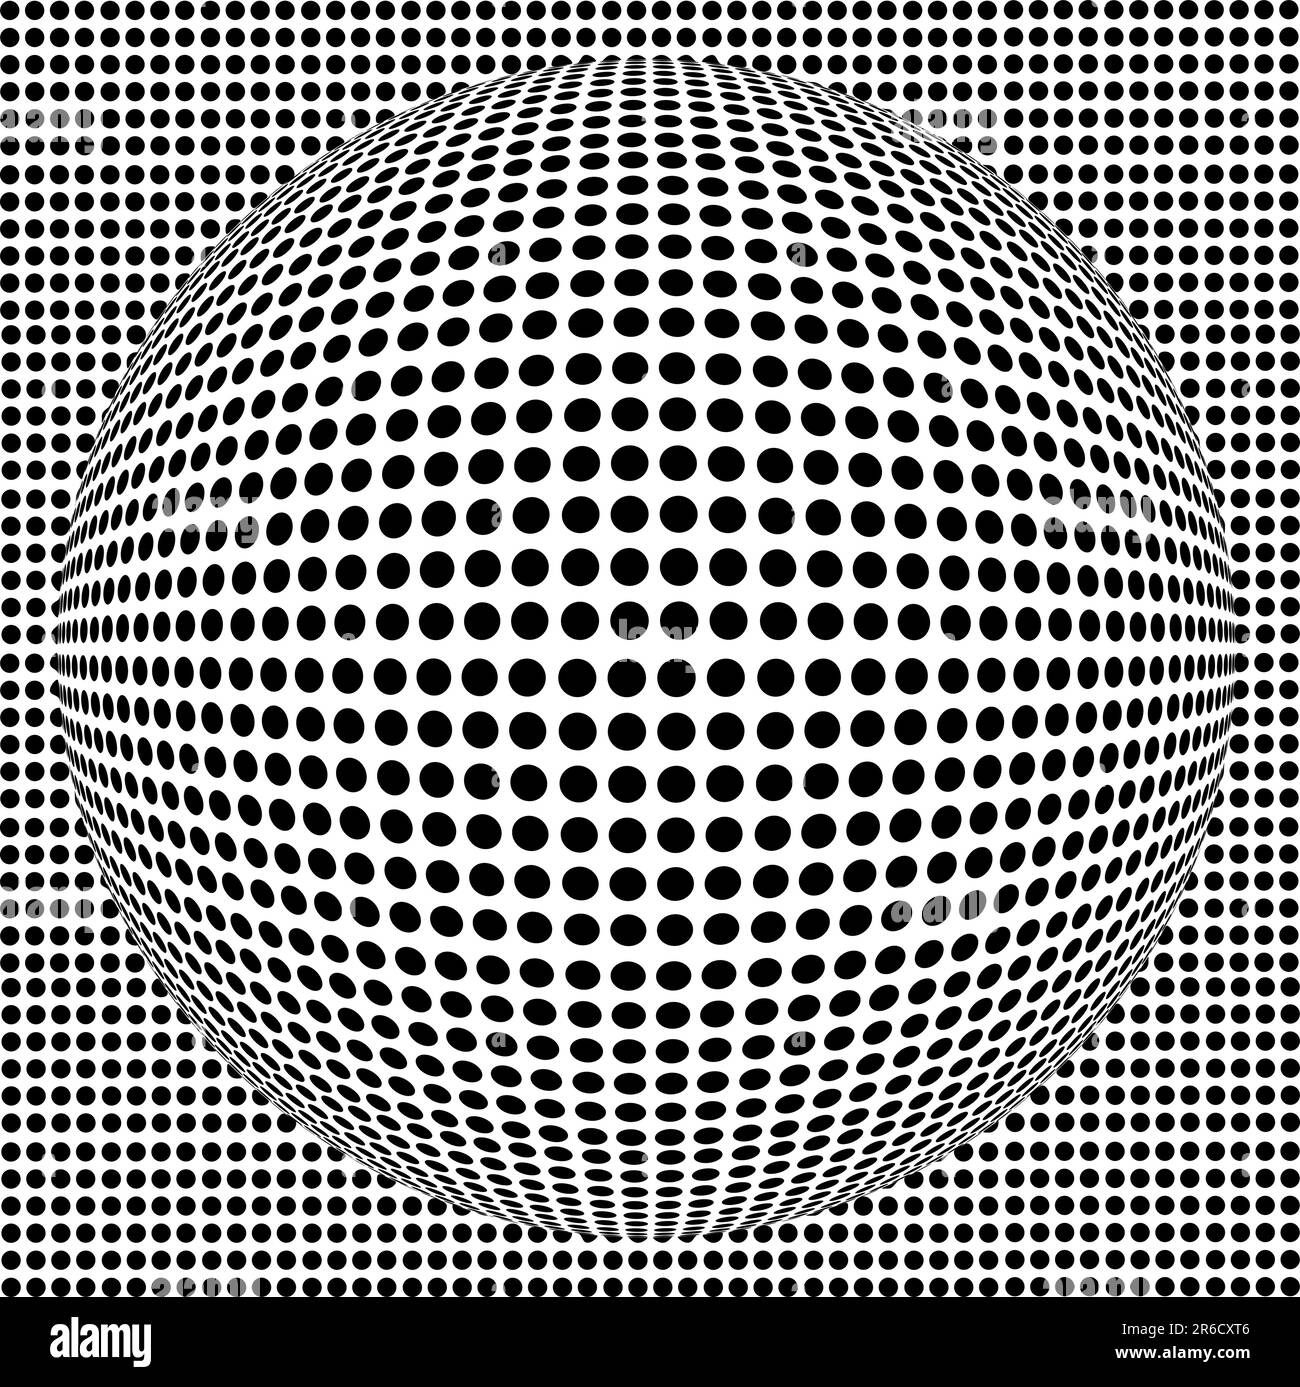 Halftone background with blowing circles Stock Vector